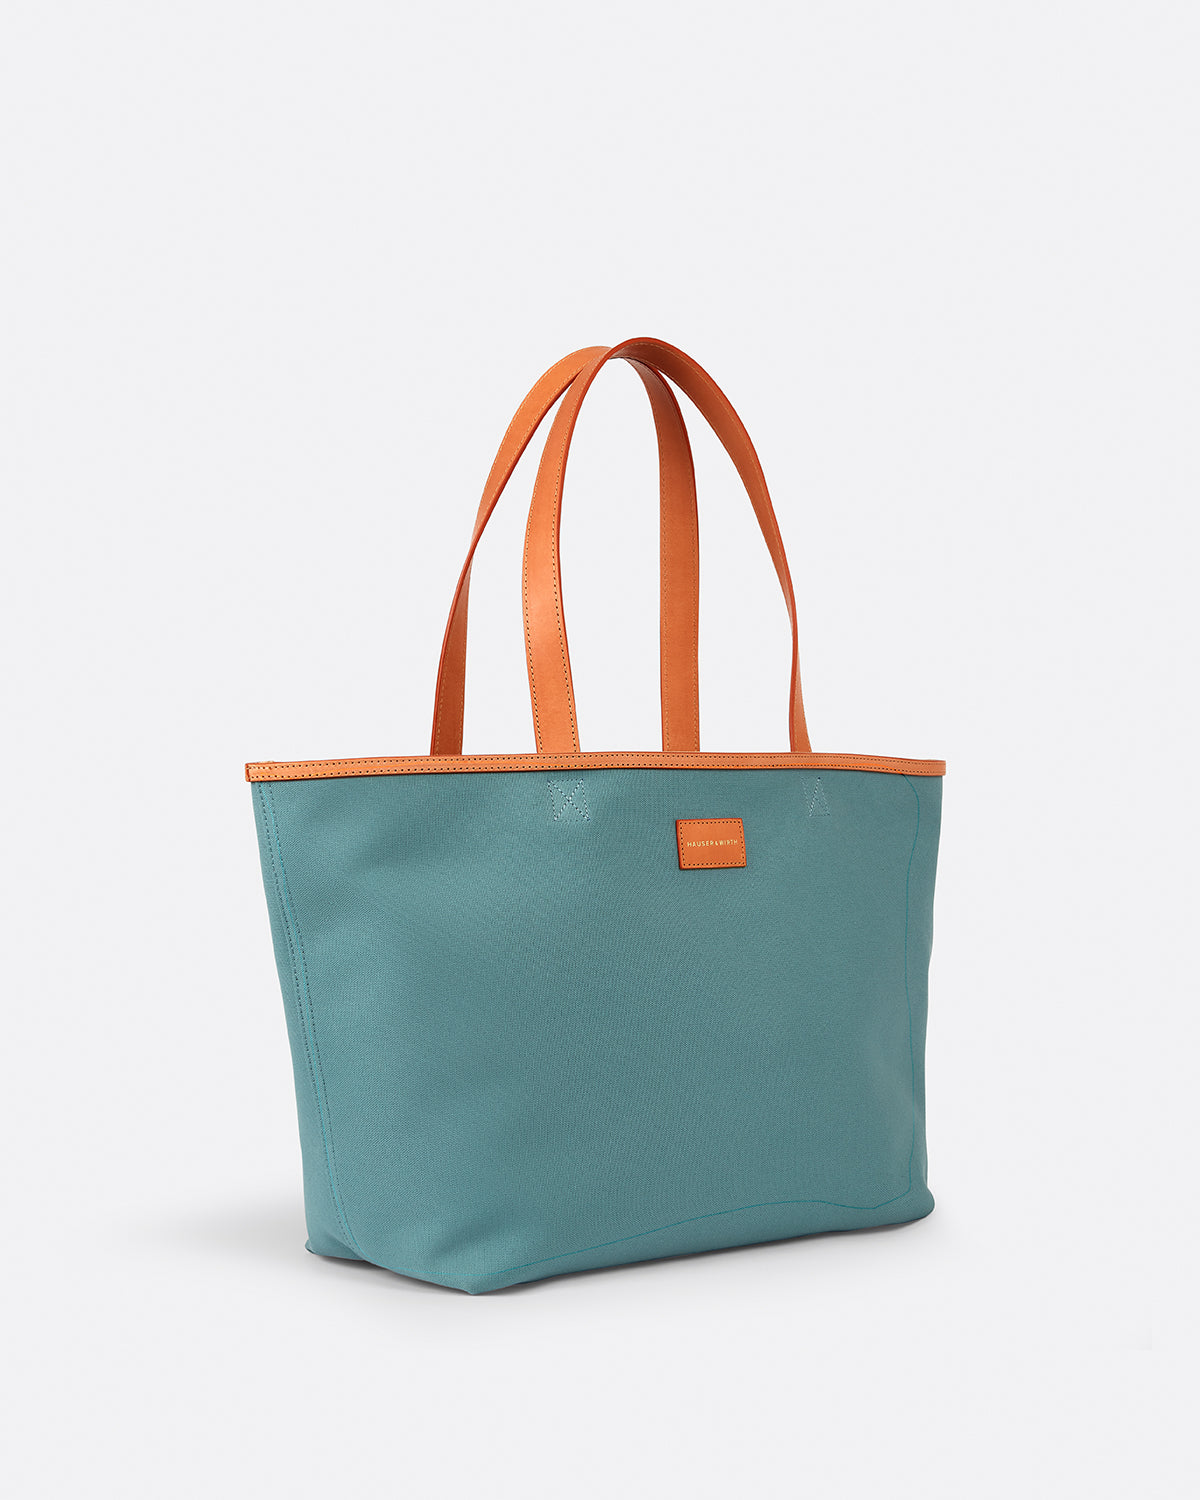 Mansur Gavriel Large Leather Tote - Blue Totes, Handbags - WGY43663